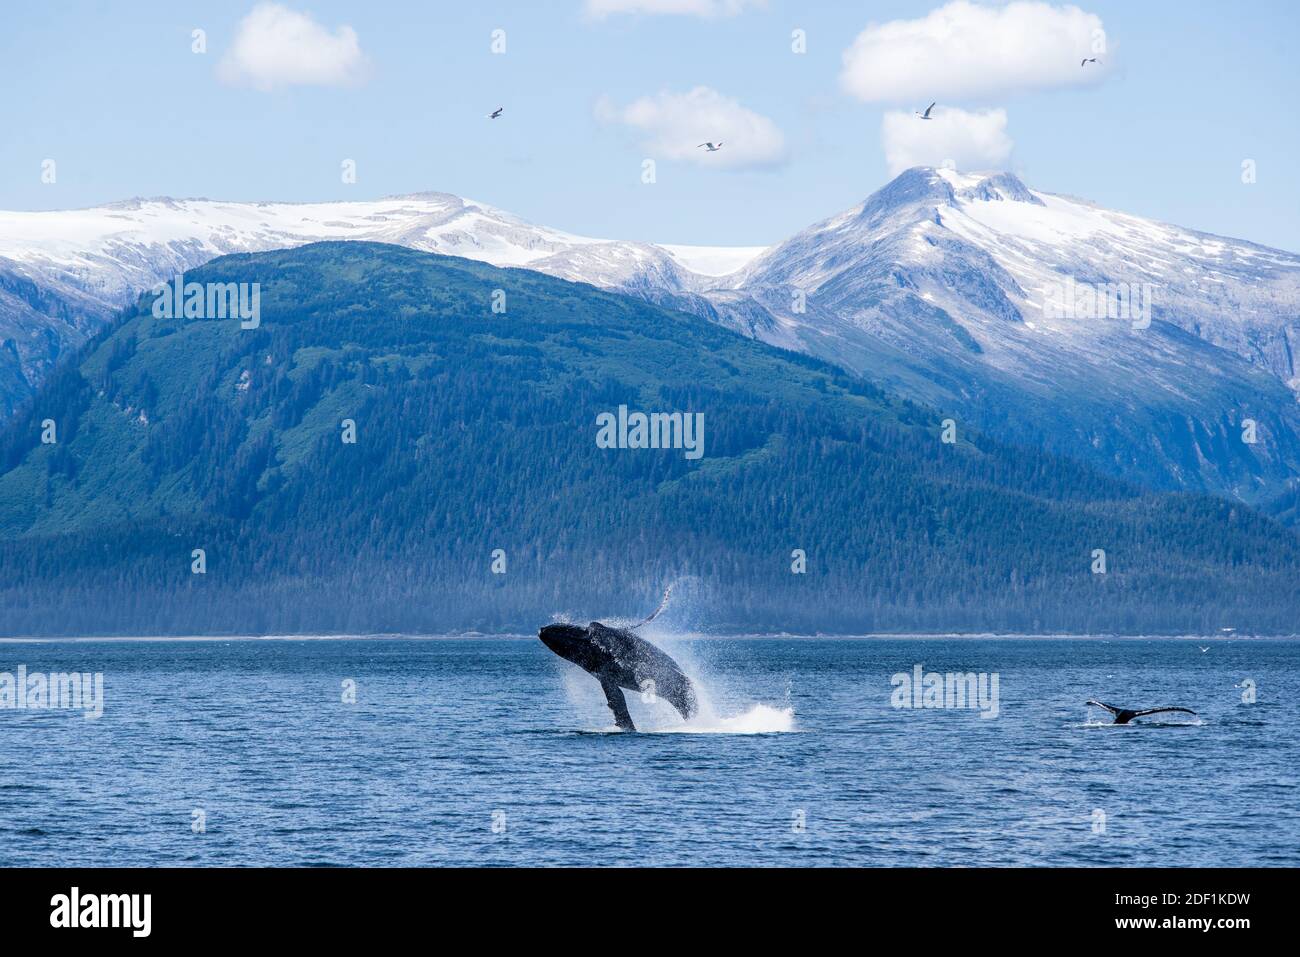 A humpack whale breaches in Alaska with snowy peaks behind Stock Photo